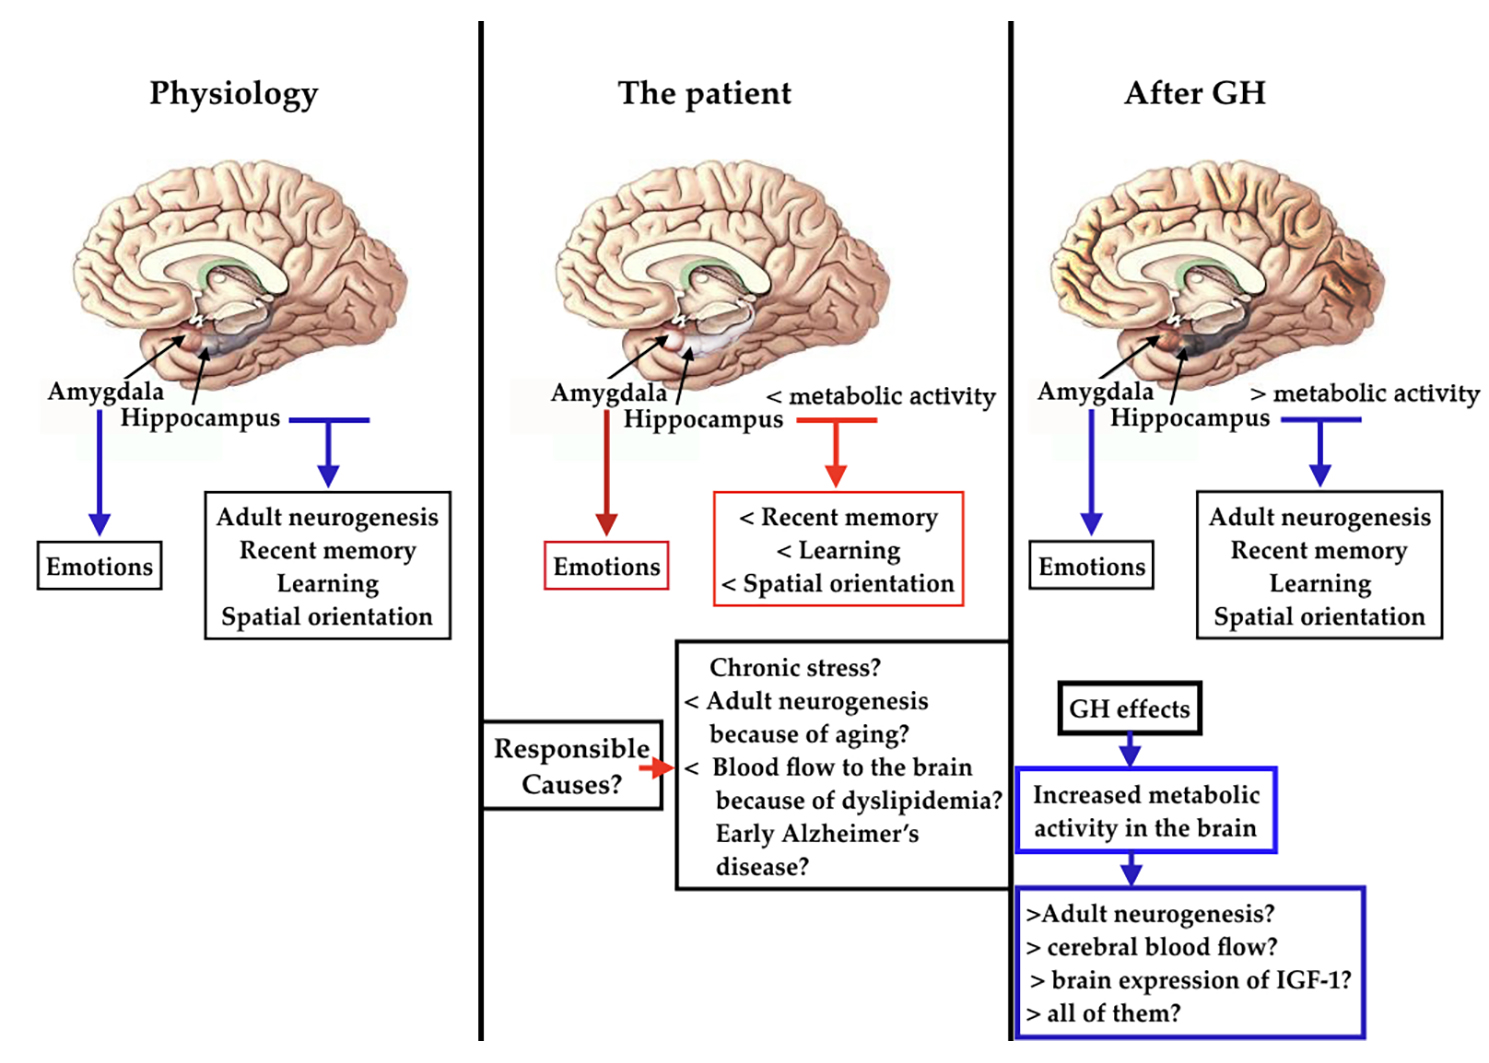 Growth Hormone Gh Administration Increases The Metabolic Activity Of The Left Hippocampus In An Elder Patient With Cognitive Disorders V1 Preprints